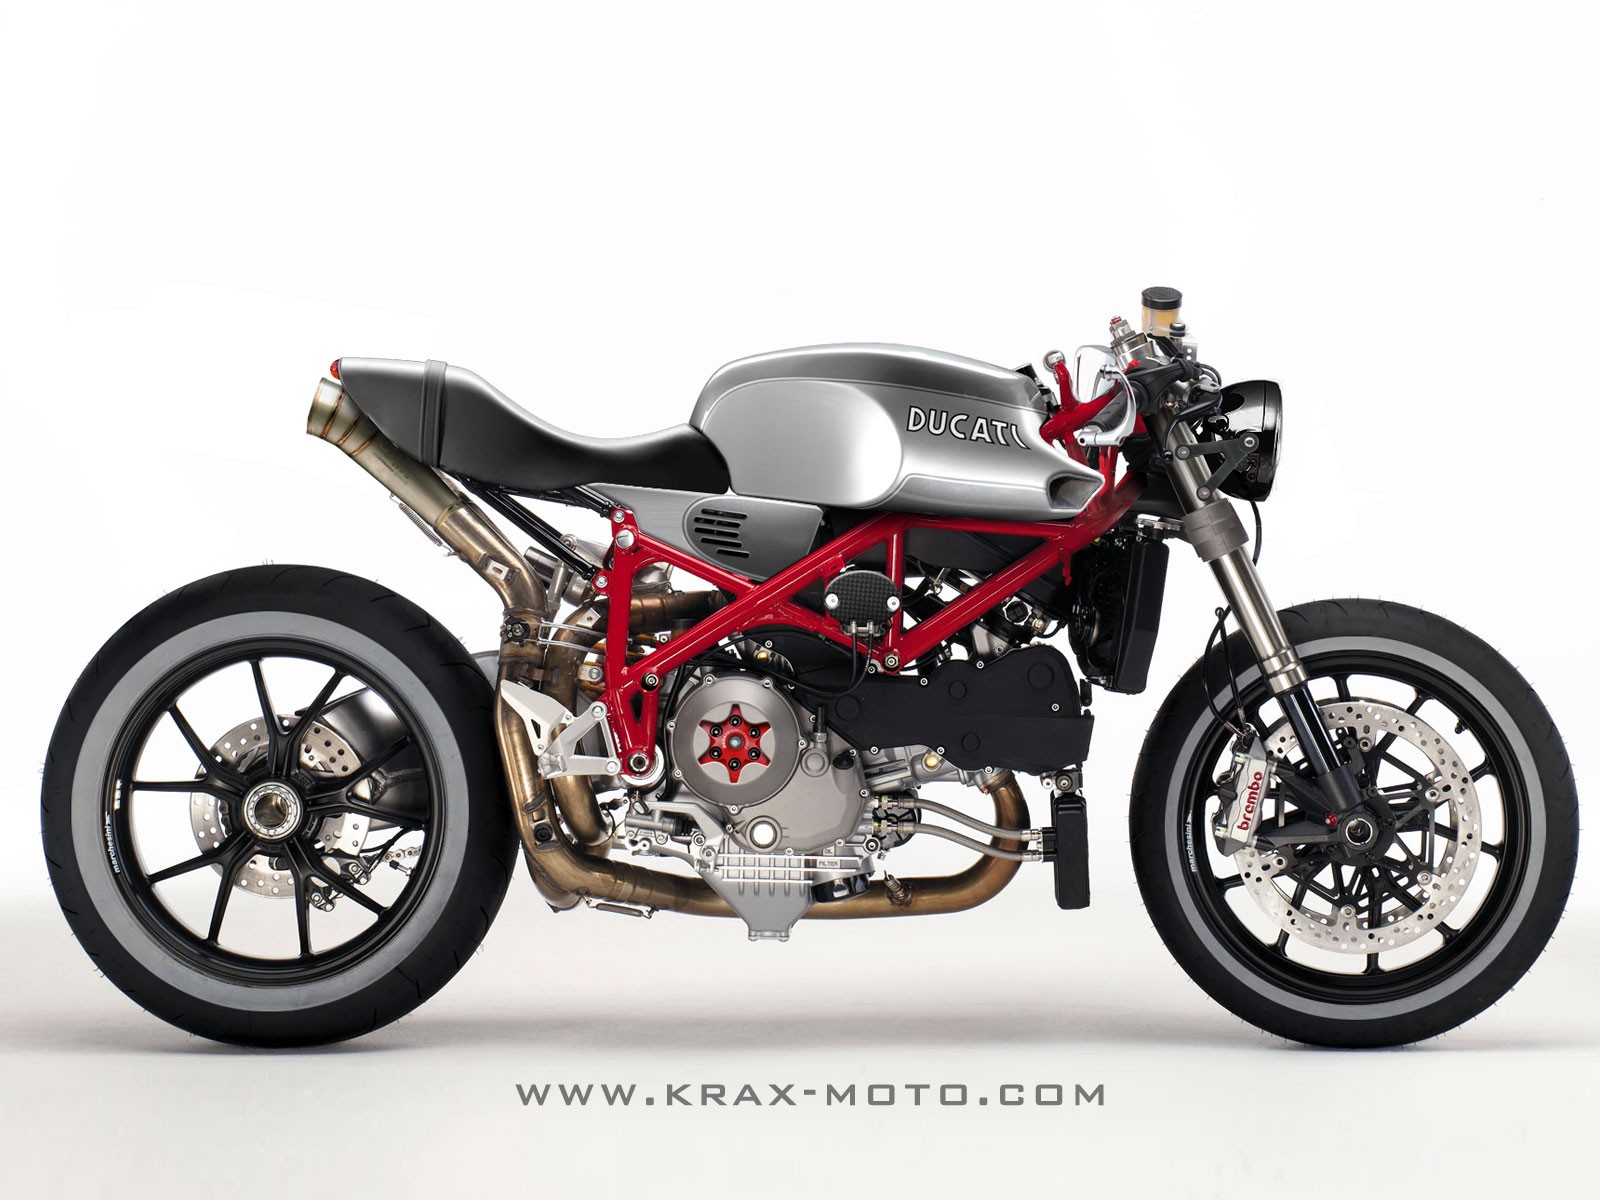 General 1600x1200 Ducati motorcycle vehicle Silver Motorcycles white background simple background Italian motorcycles Volkswagen Group